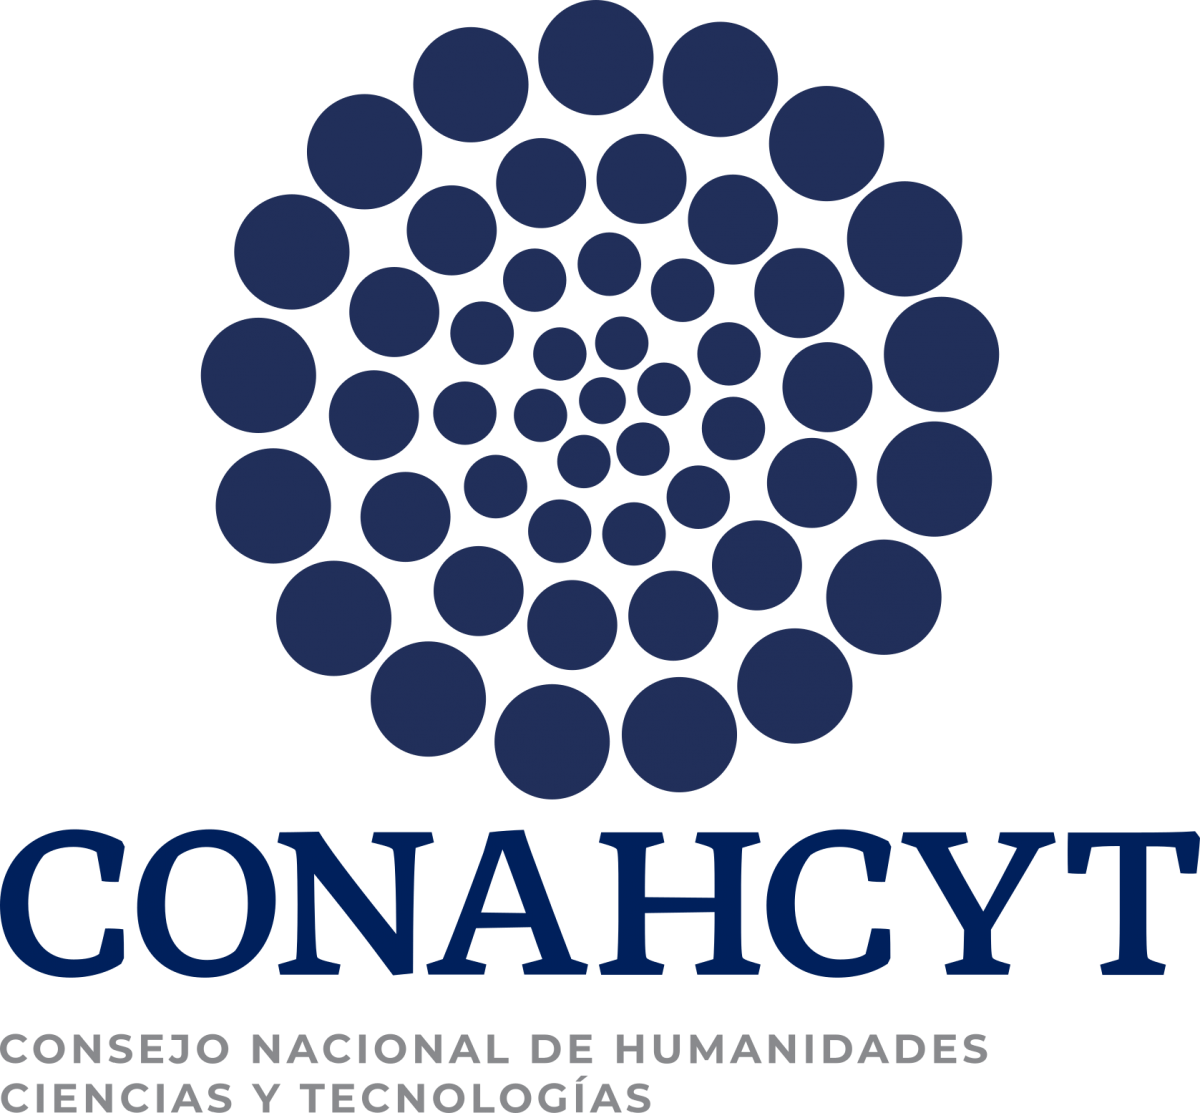 CONAHCyT